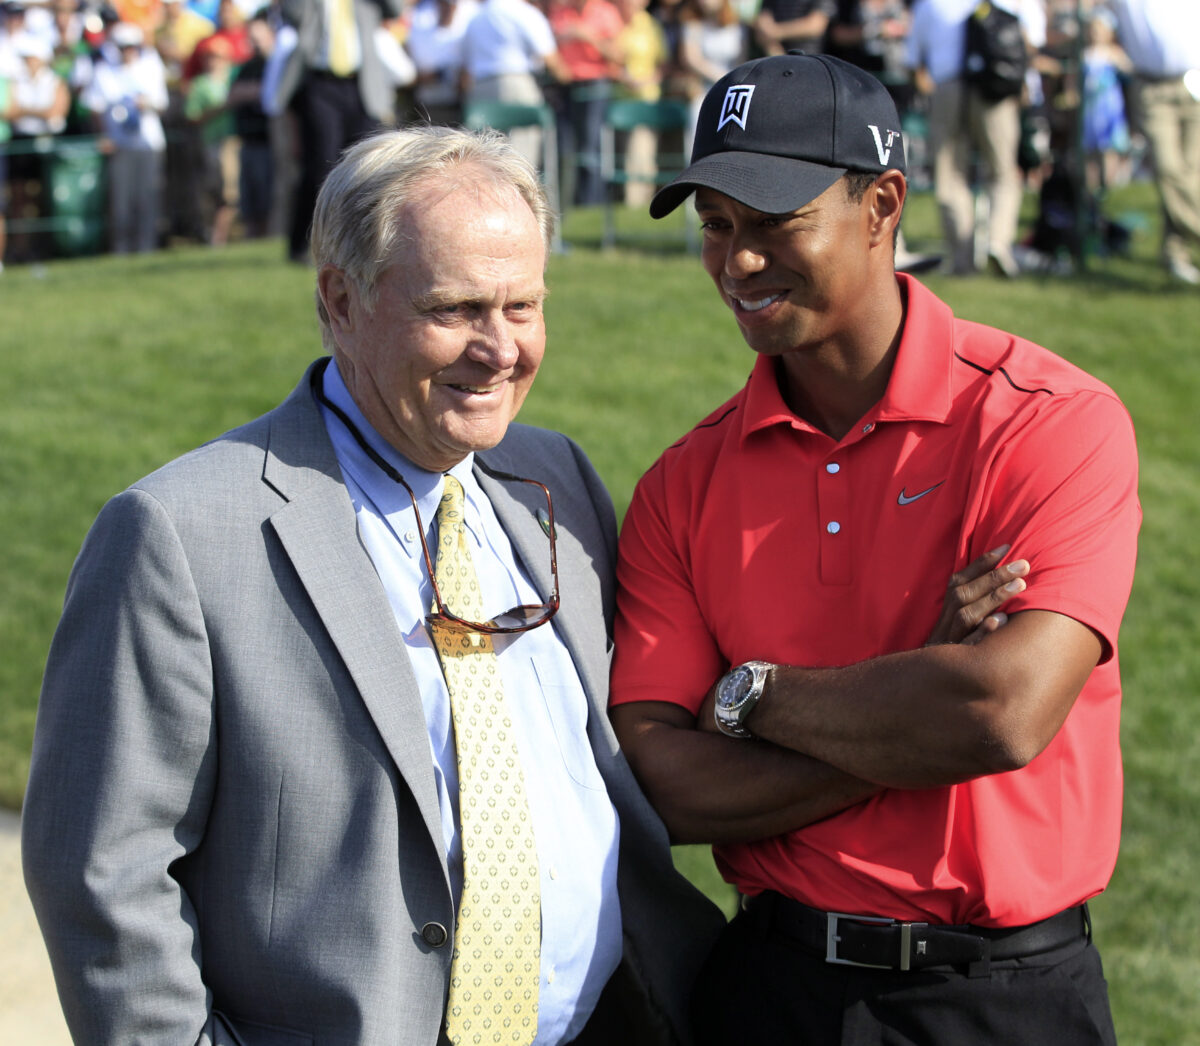 The U.S. Senior Open is heading to Ohio in 2026. Could Tiger Woods be participating?